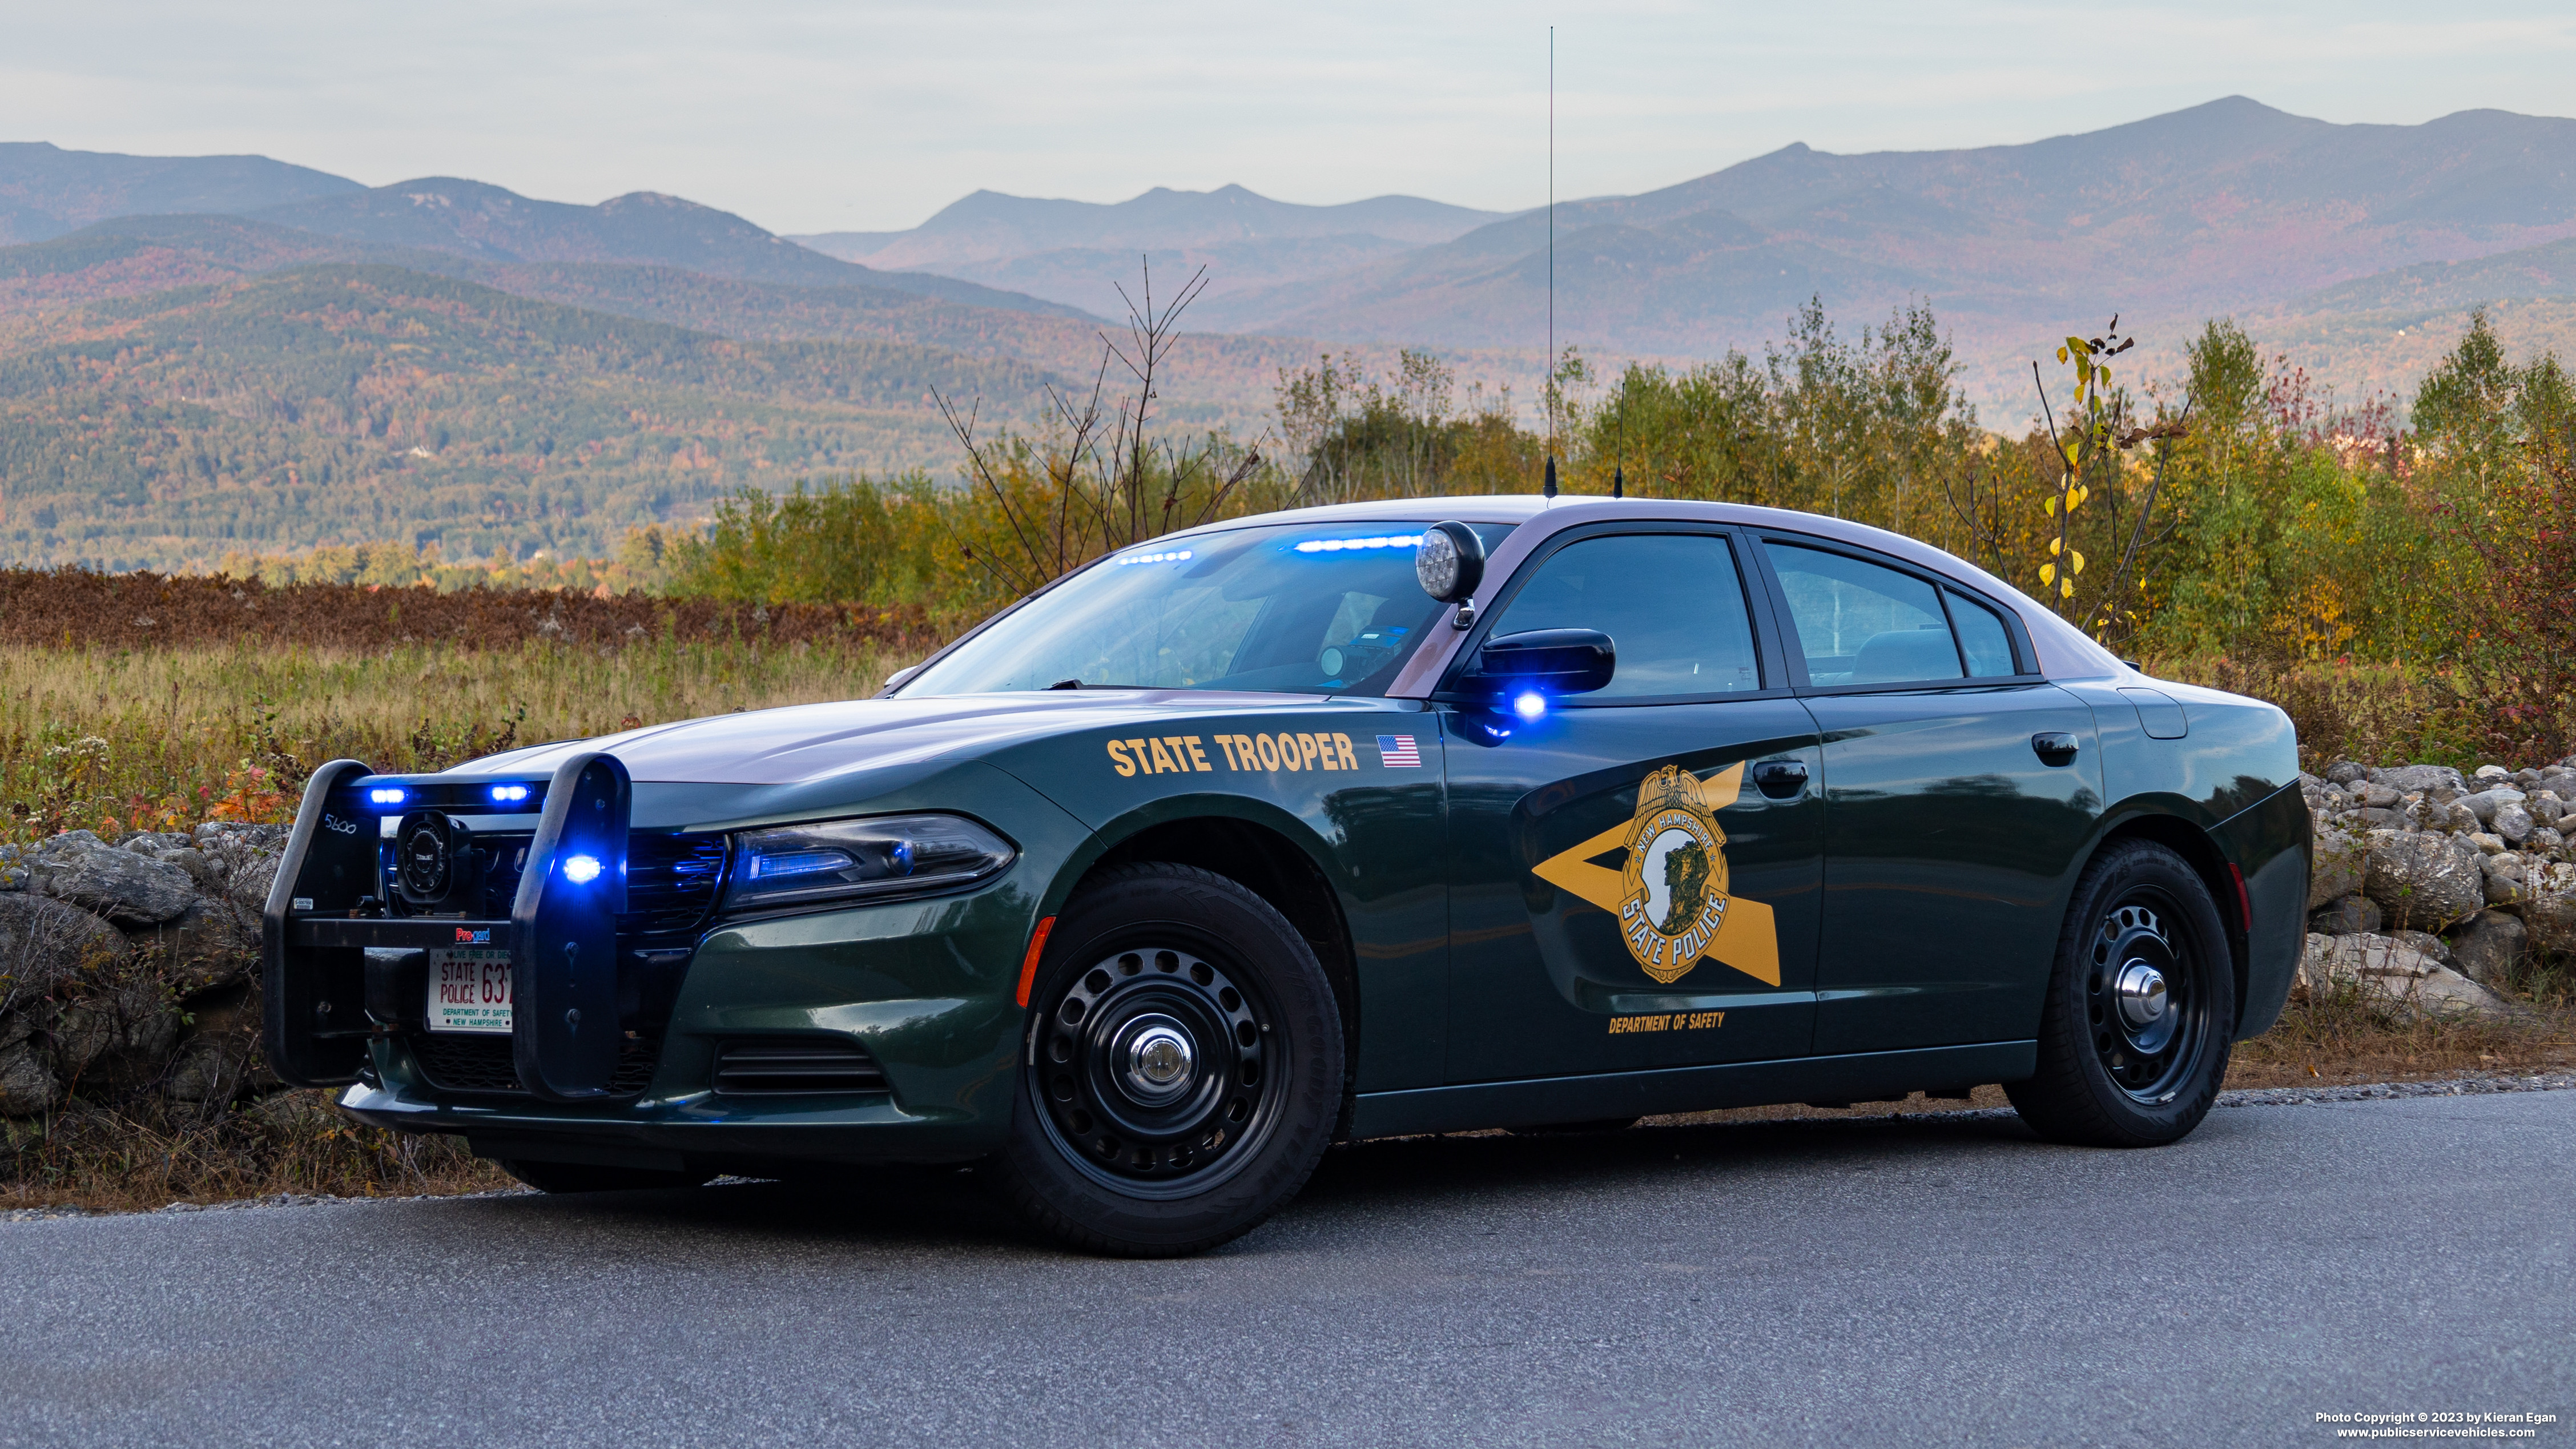 A photo  of New Hampshire State Police
            Cruiser 637, a 2021 Dodge Charger             taken by Kieran Egan